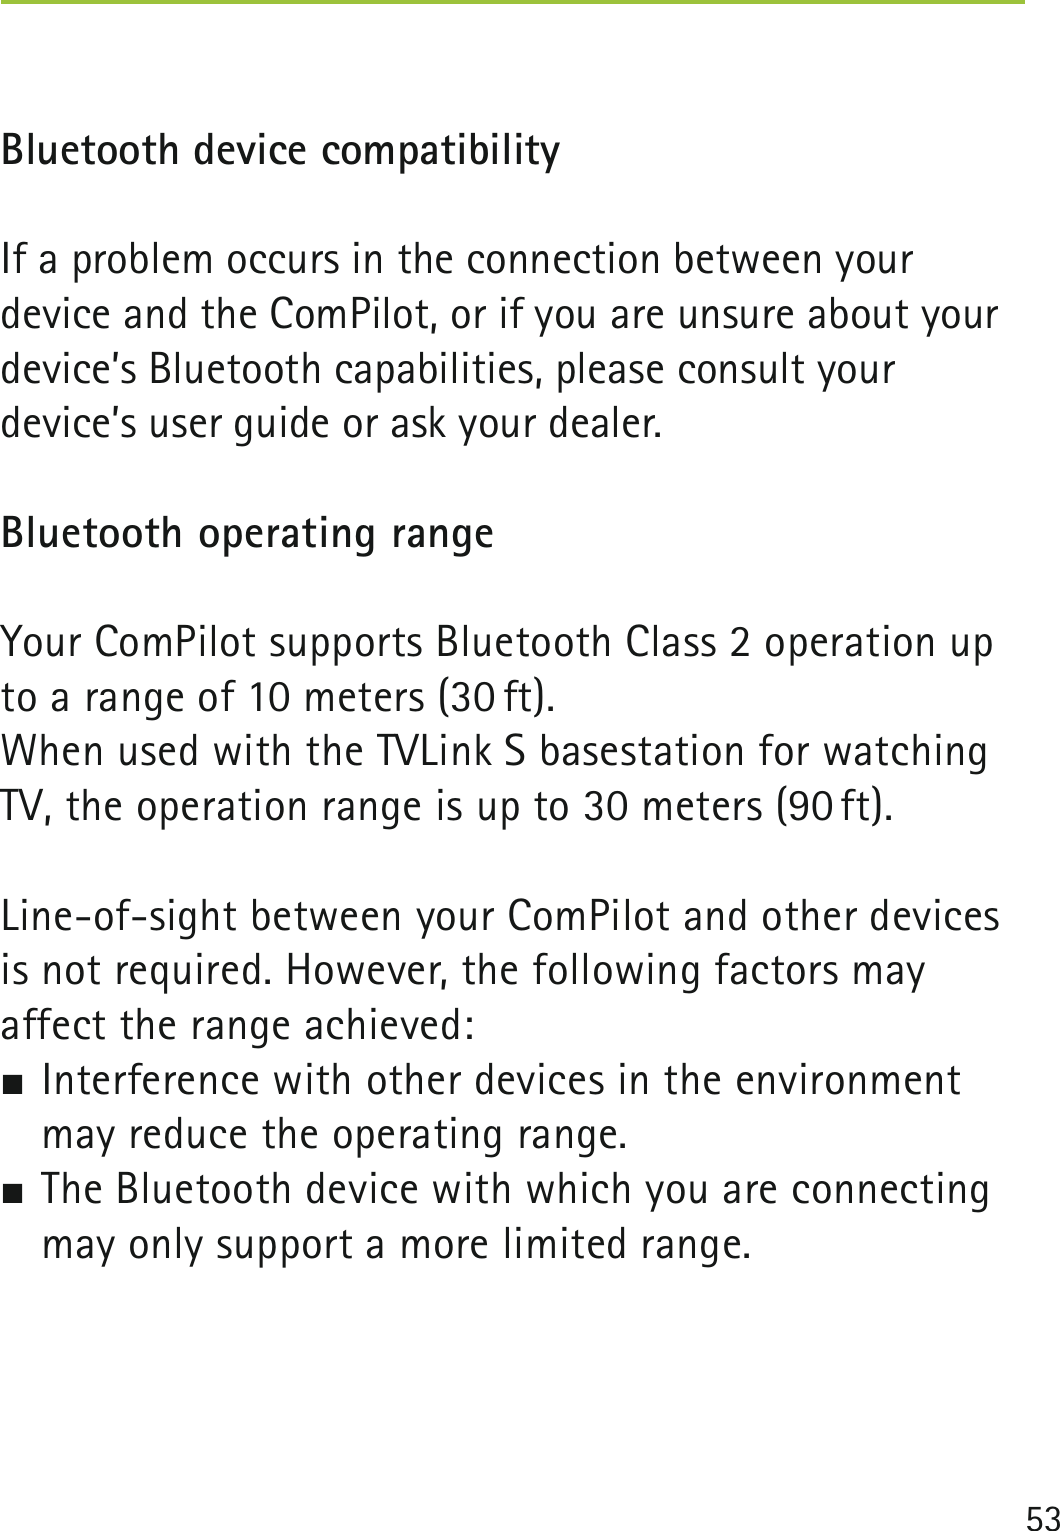 53 Bluetooth device compatibilityIf a problem occurs in the connection between your device and the ComPilot, or if you are unsure about your device’s Bluetooth capabilities, please consult your device’s user guide or ask your dealer.Bluetooth operating rangeYour ComPilot supports Bluetooth Class 2 operation up to a range of 10 meters (30 ft). When used with the TVLink S basestation for watching TV, the operation range is up to 30 meters (90 ft).Line-of-sight between your ComPilot and other devices is not required. However, the following factors may  affect the range achieved: Interference with other devices in the environment may reduce the operating range. The Bluetooth device with which you are connecting may only support a more limited range.